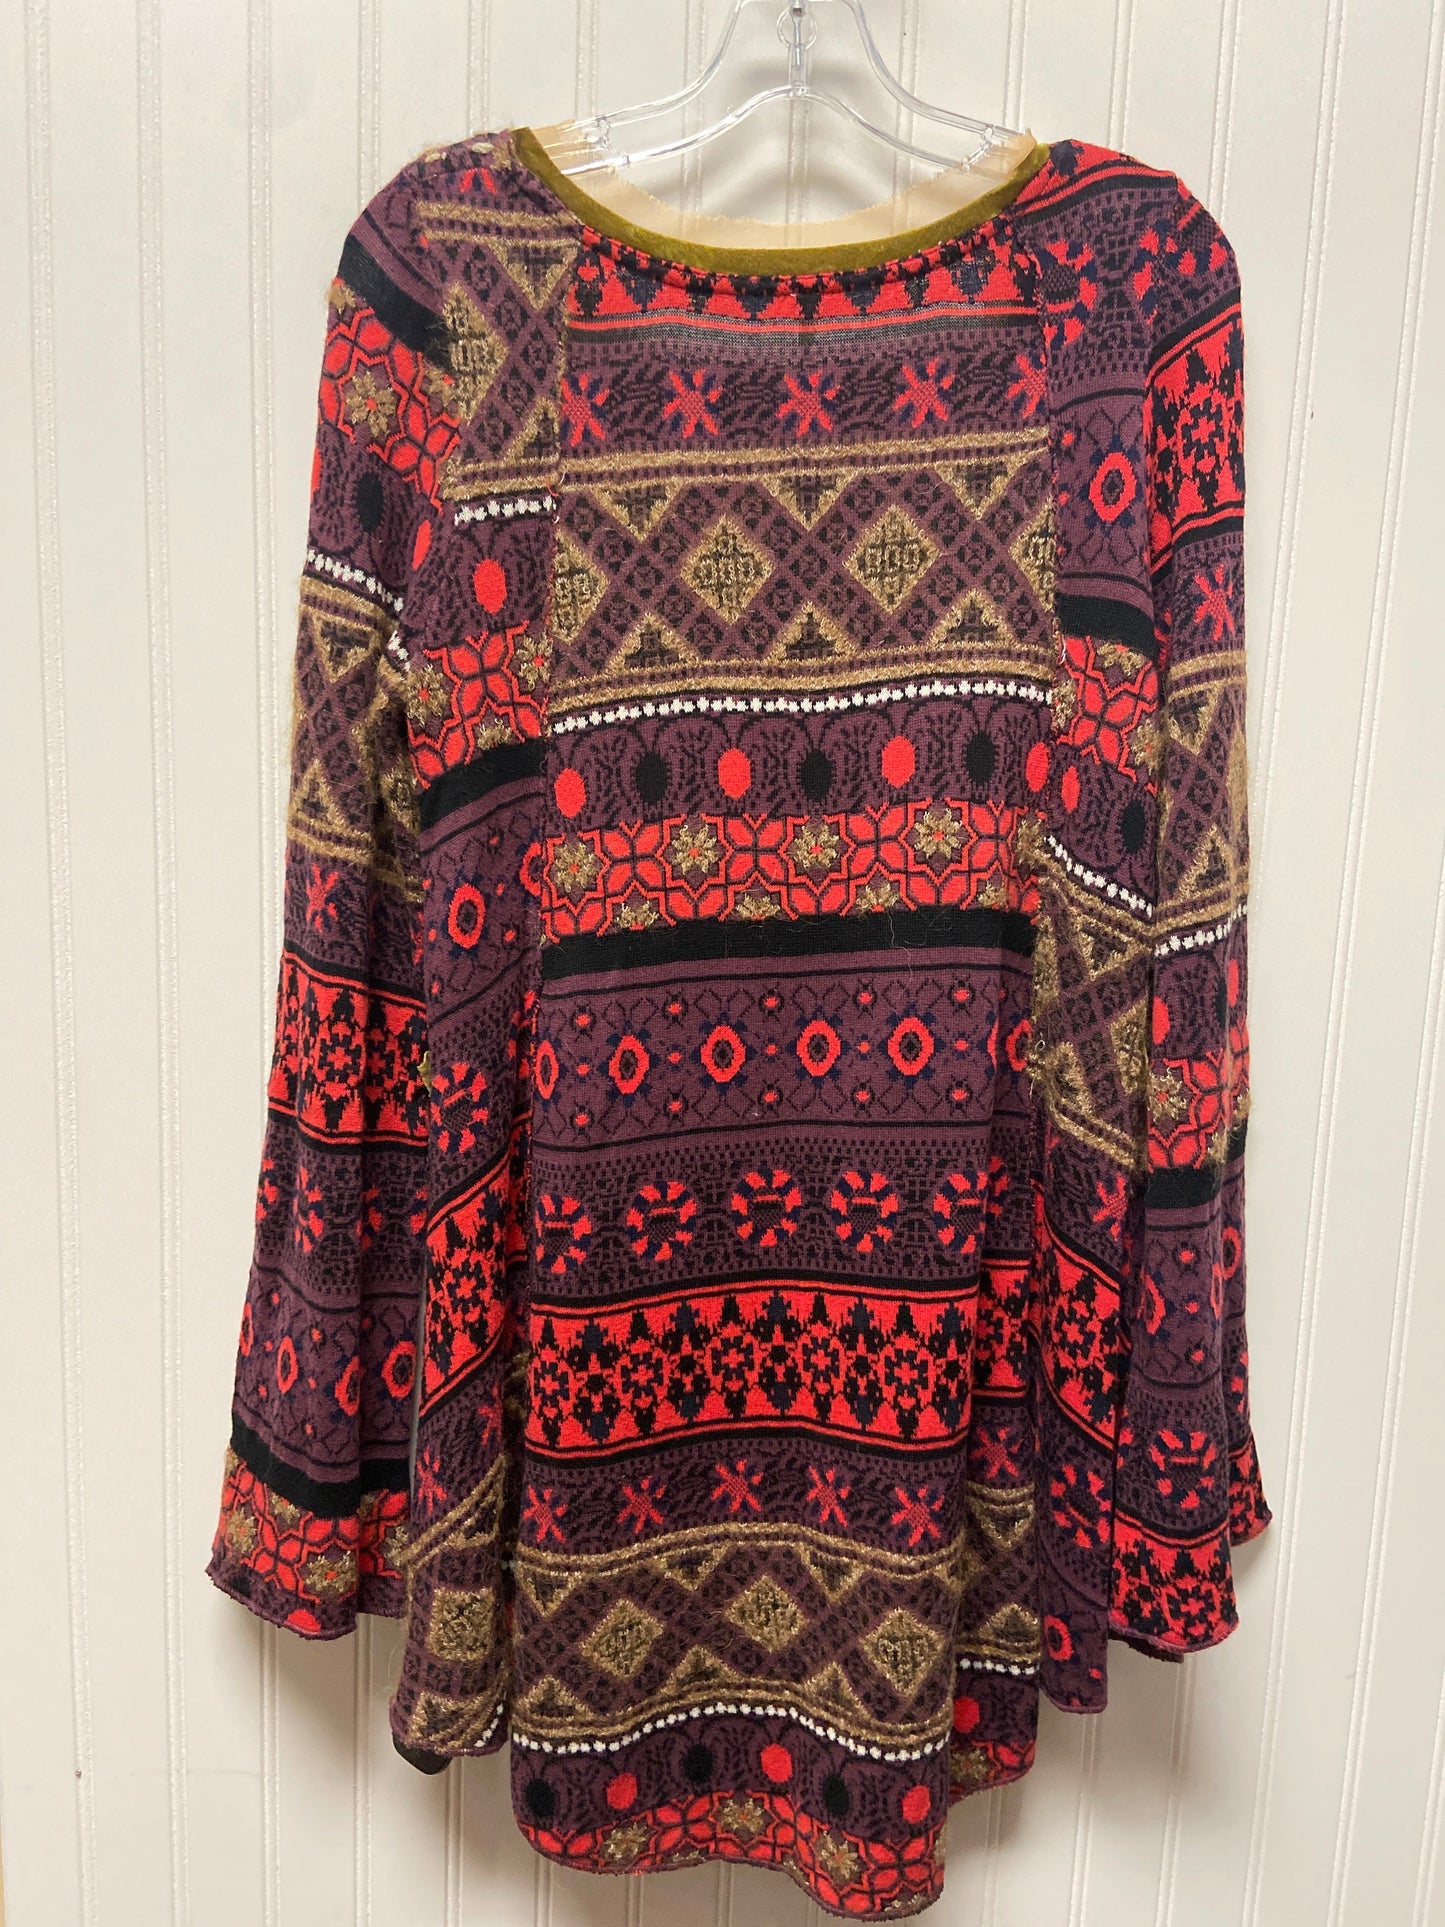 Multi-colored Top Long Sleeve Free People, Size Petite   S